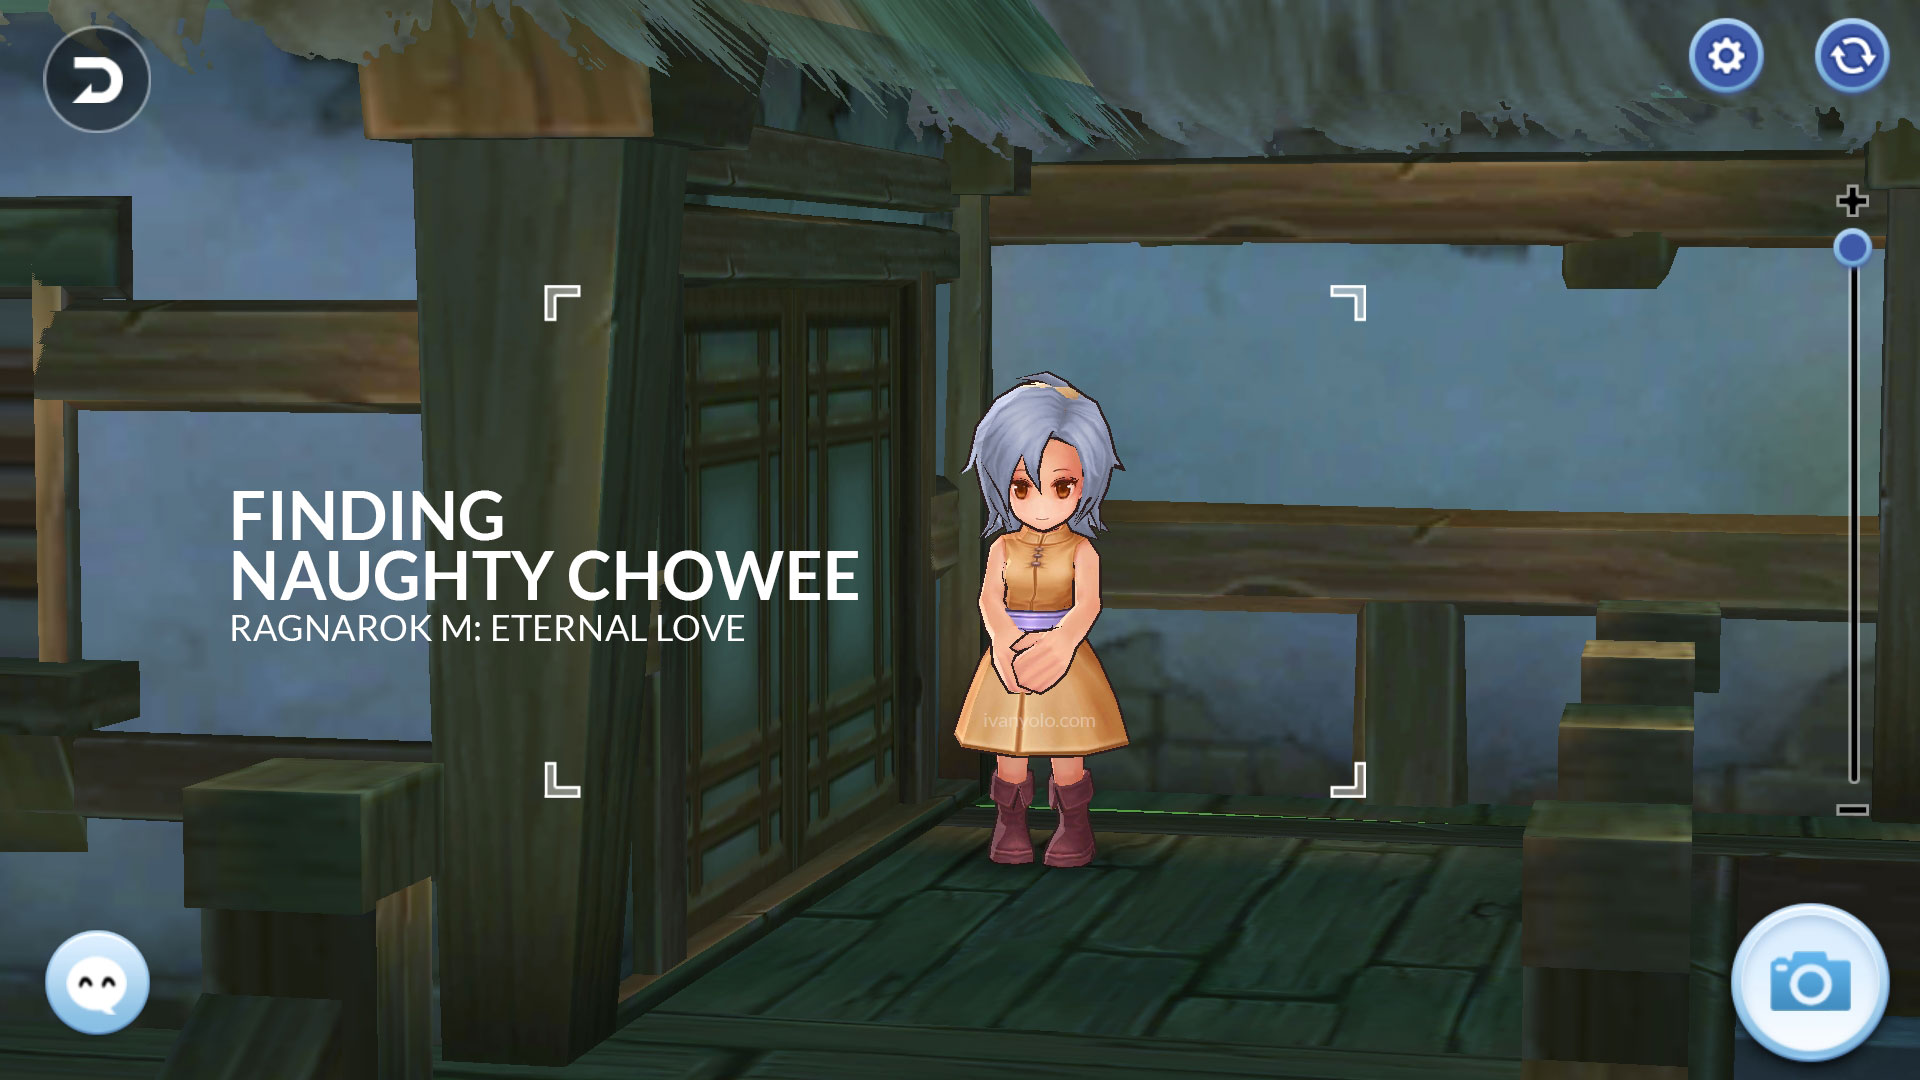 Finding Naughty Chowee Quest in Payon